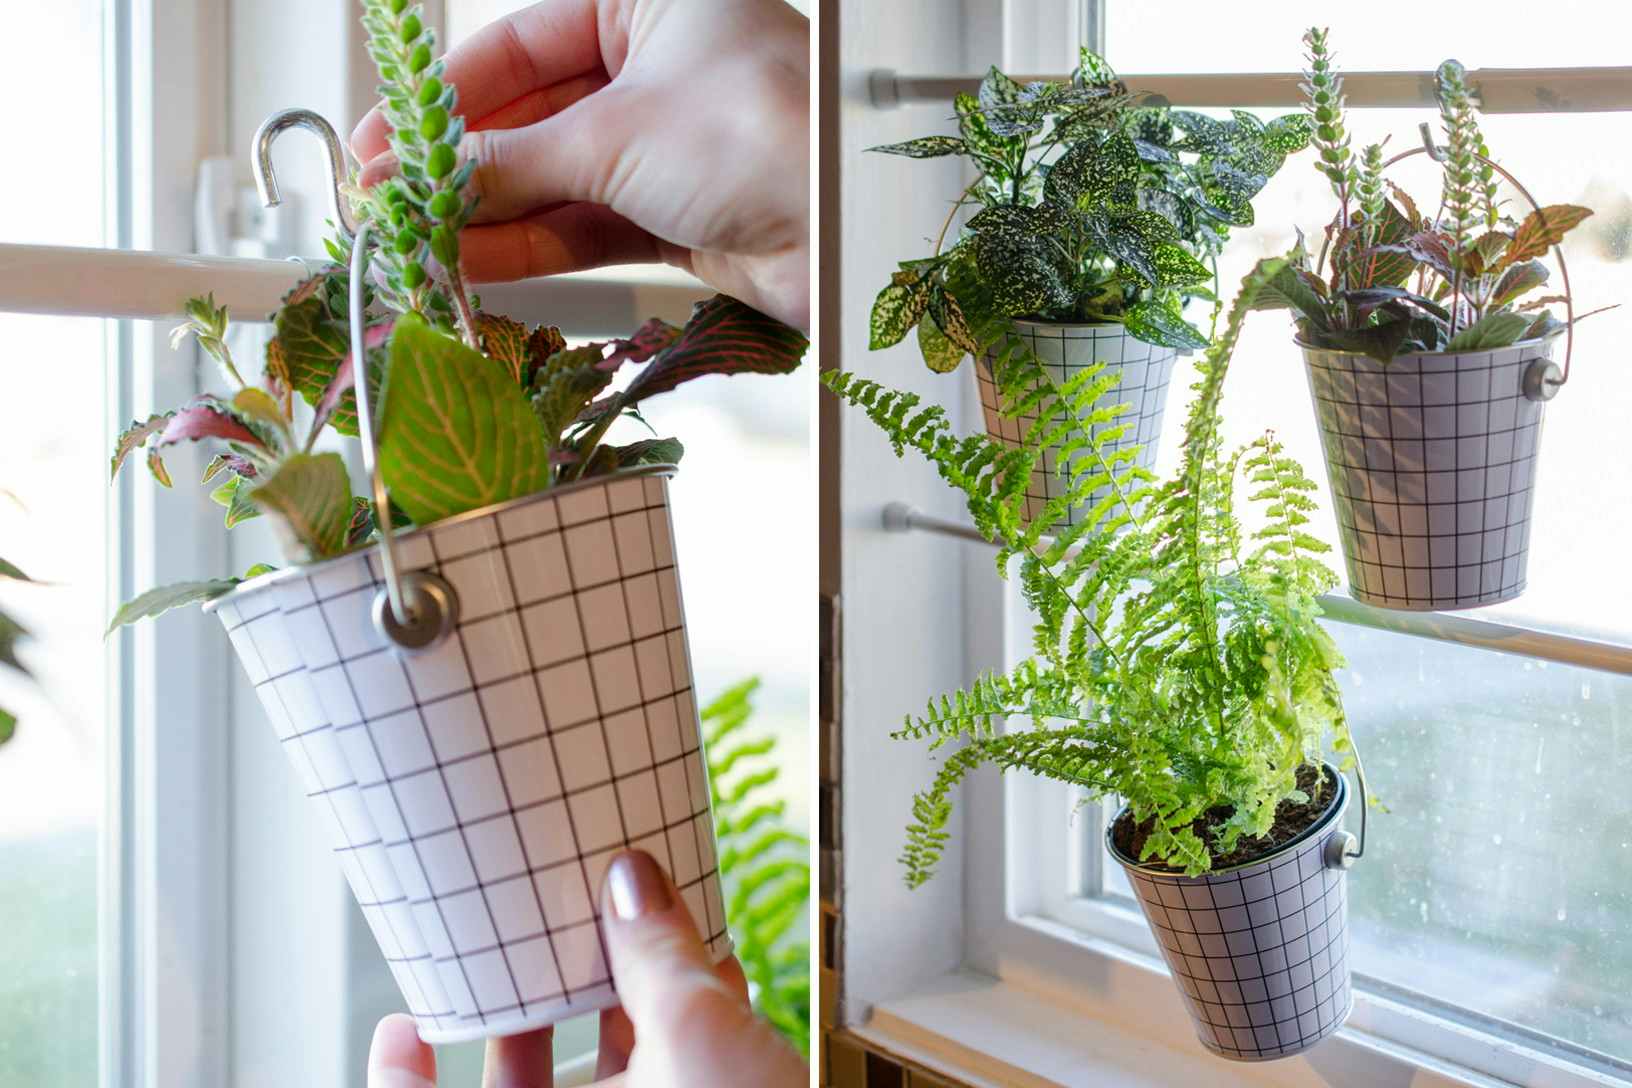 Hang potted plants from tension rods using S-Hooks